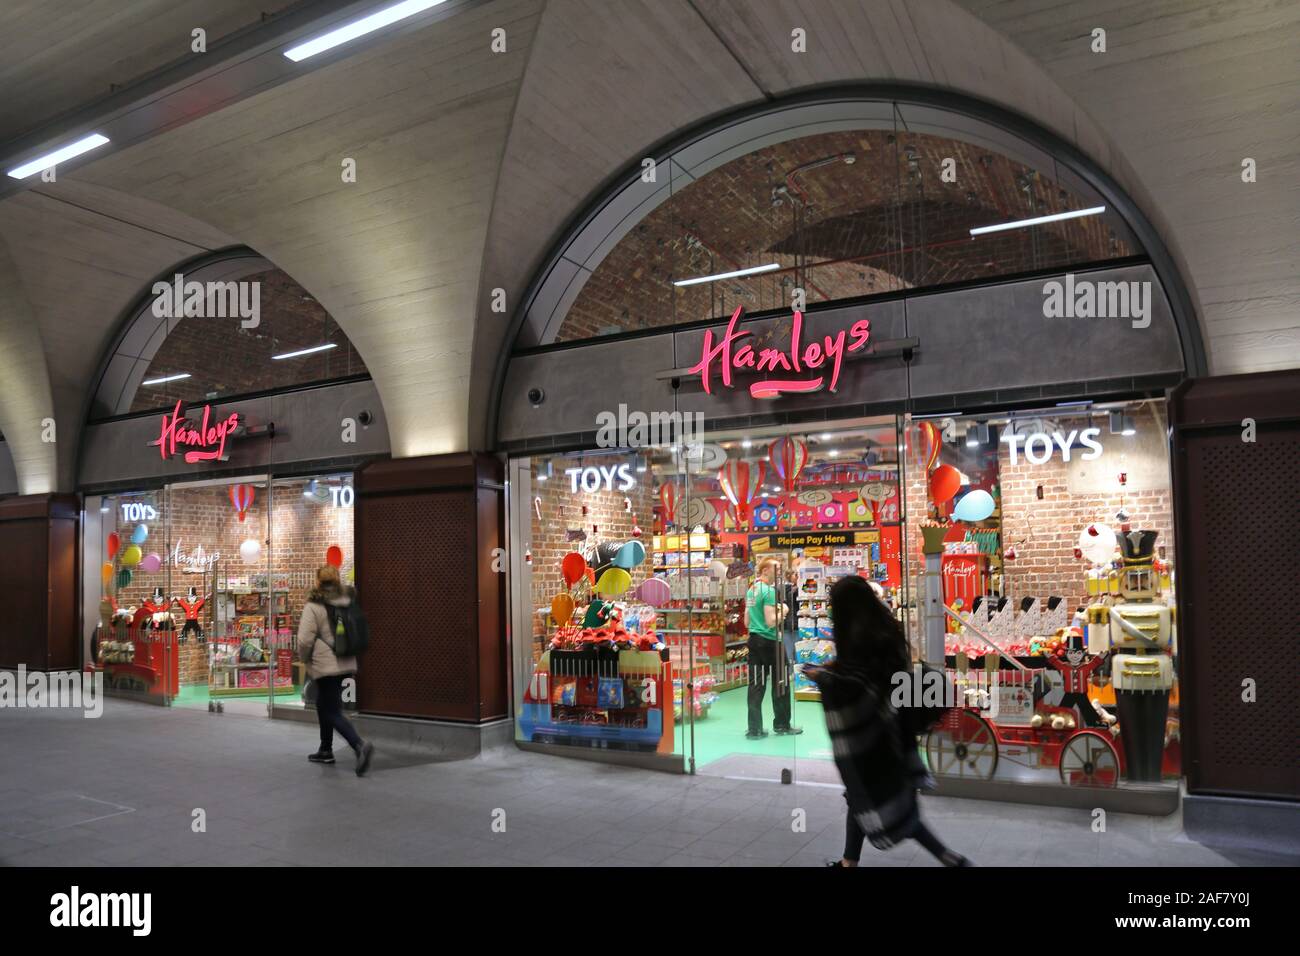 A branch of Hamleys, the UK toy store in the new shopping arcade at London Bridge station, London, UK Stock Photo